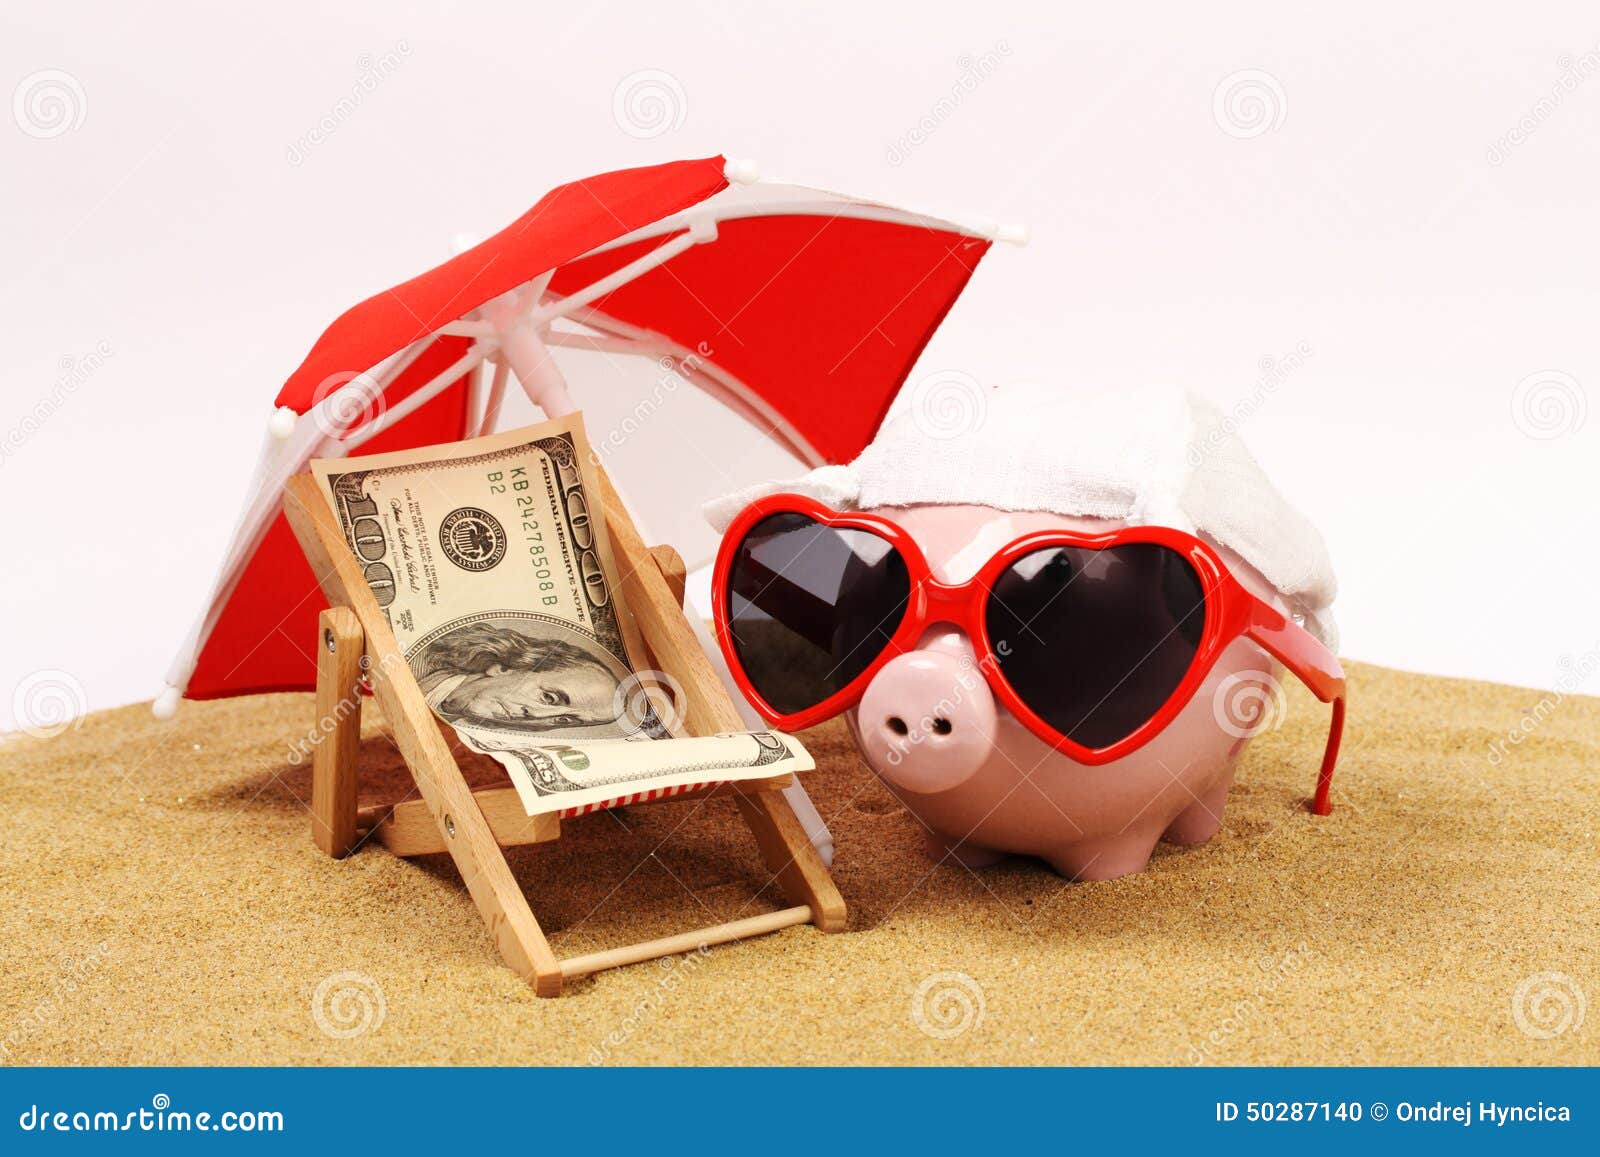 summer piggy bank with heart sunglasses standing on sand under red and white sunshade next to beach chair with towel from